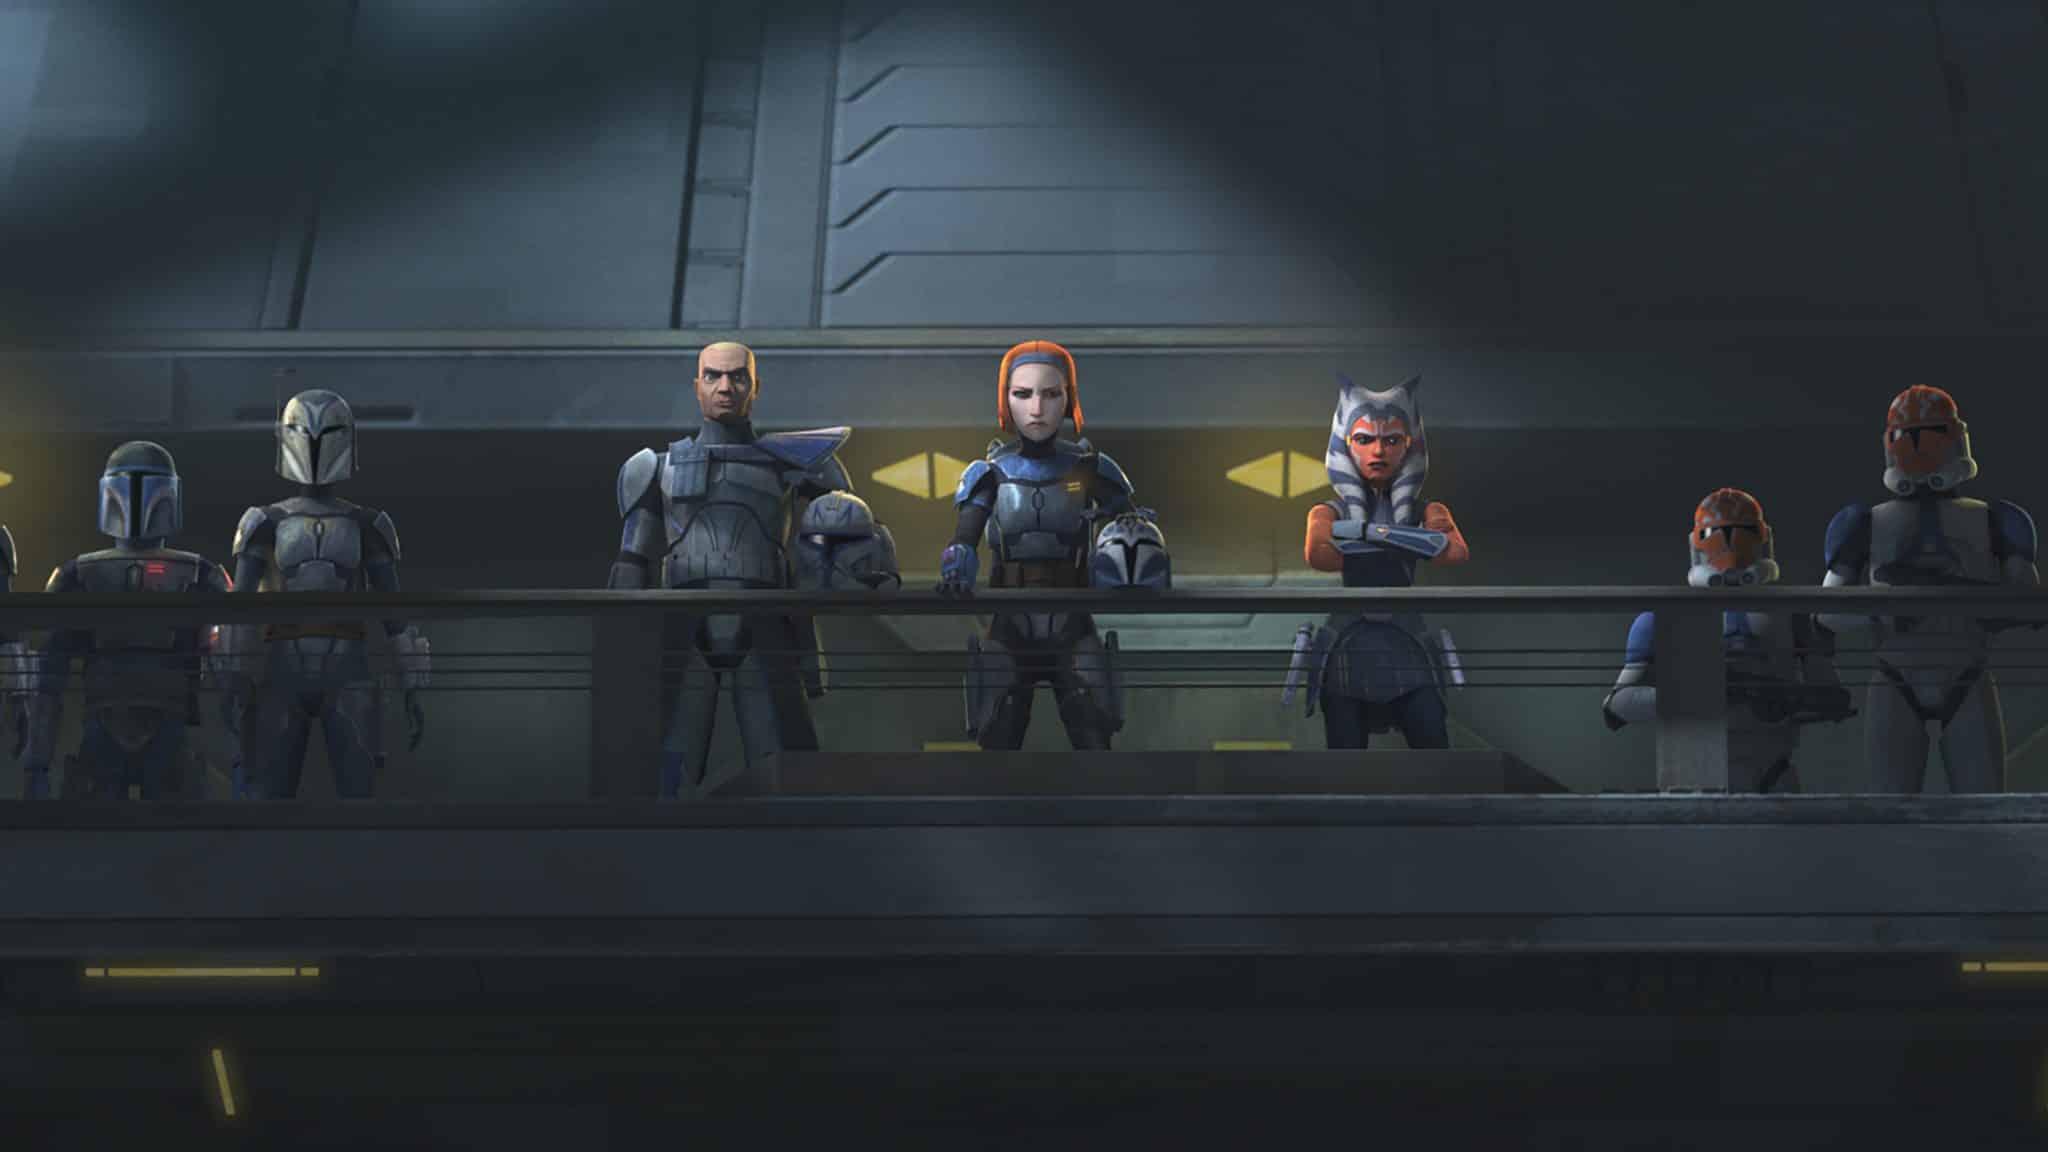 Are you looking forward to this episode of Star Wars: The Clone Wars? 